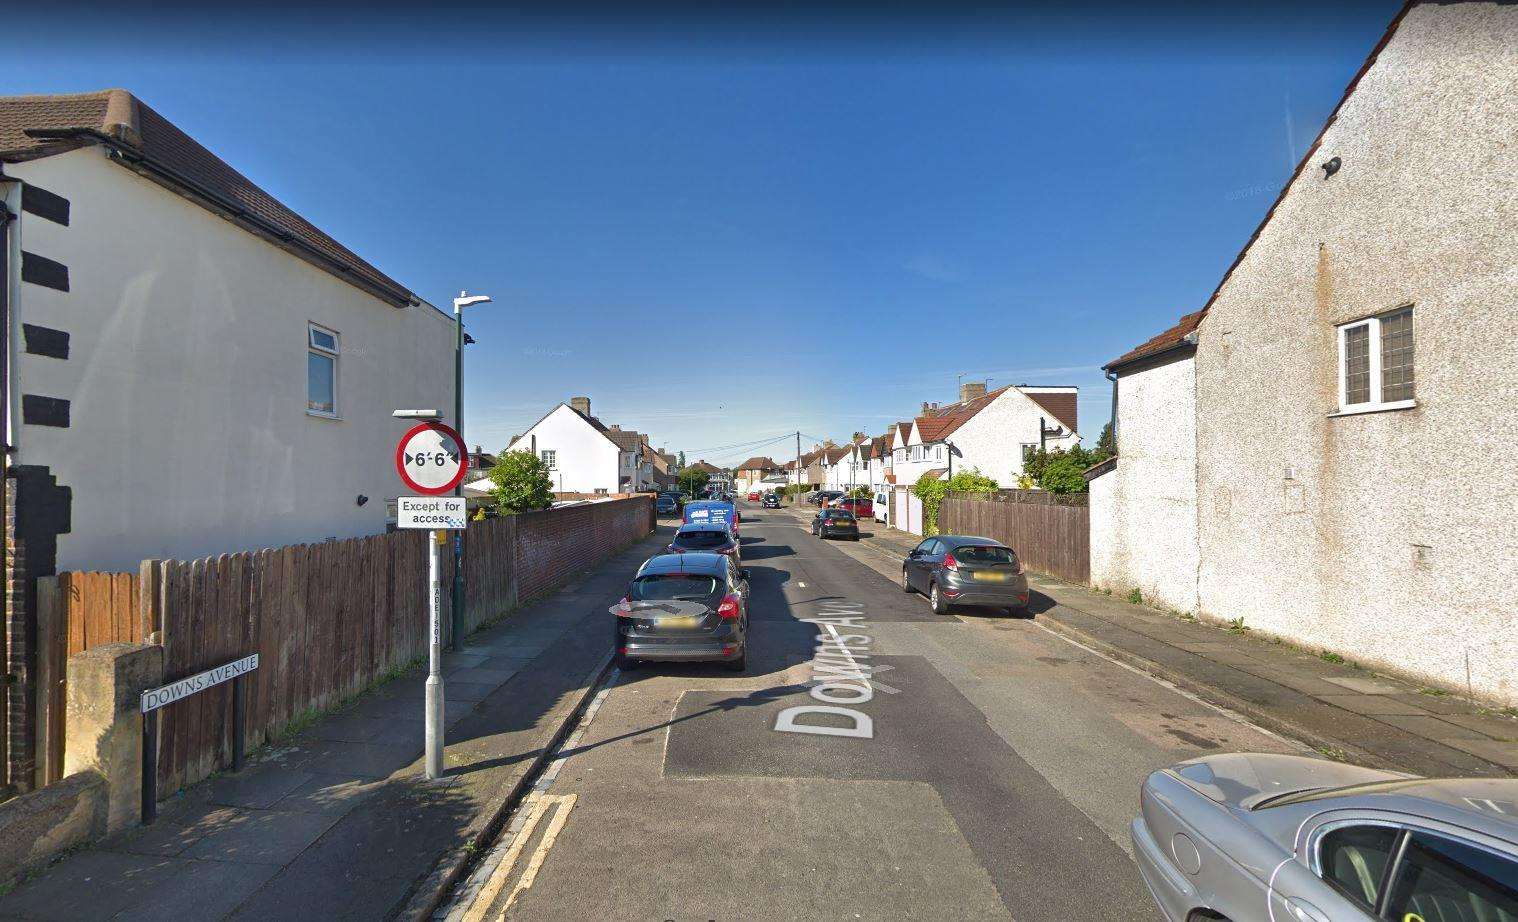 Downs Avenue in Dartford. Picture from Googlemaps (6562096)